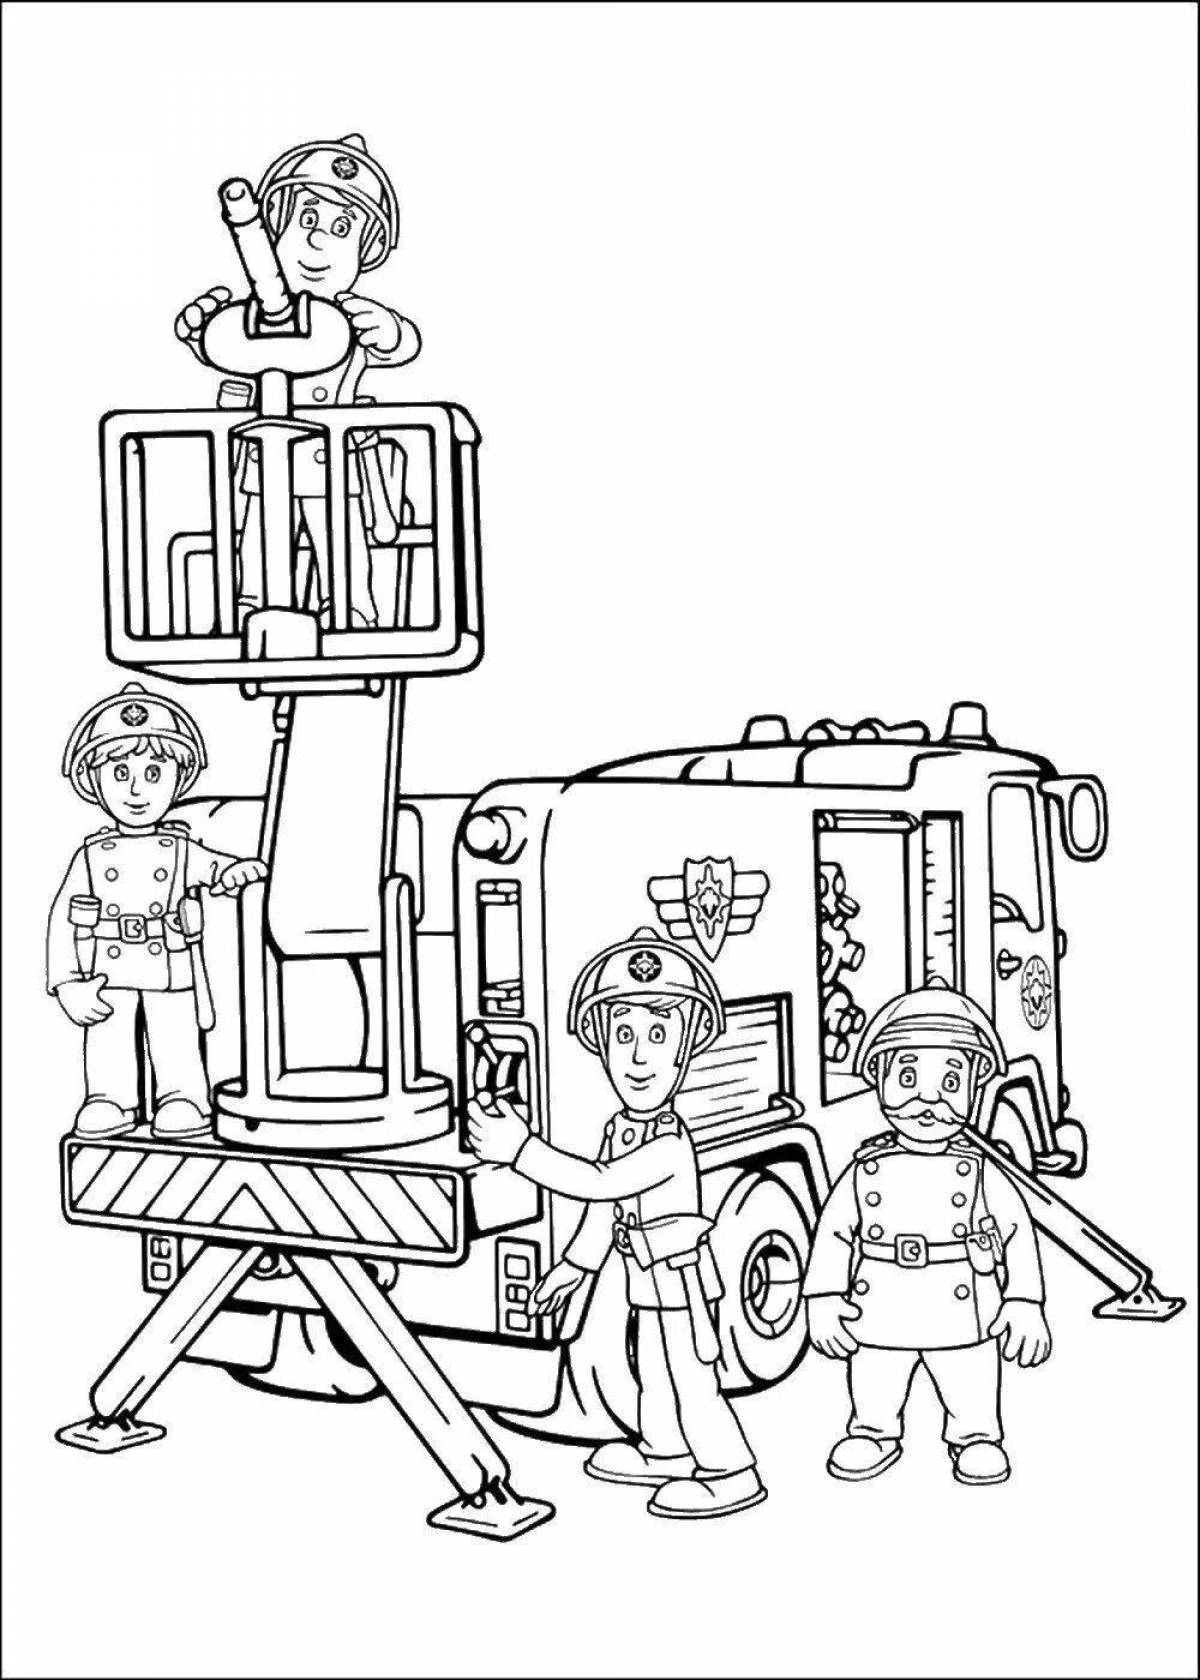 Glorious fireman sam coloring pages for kids